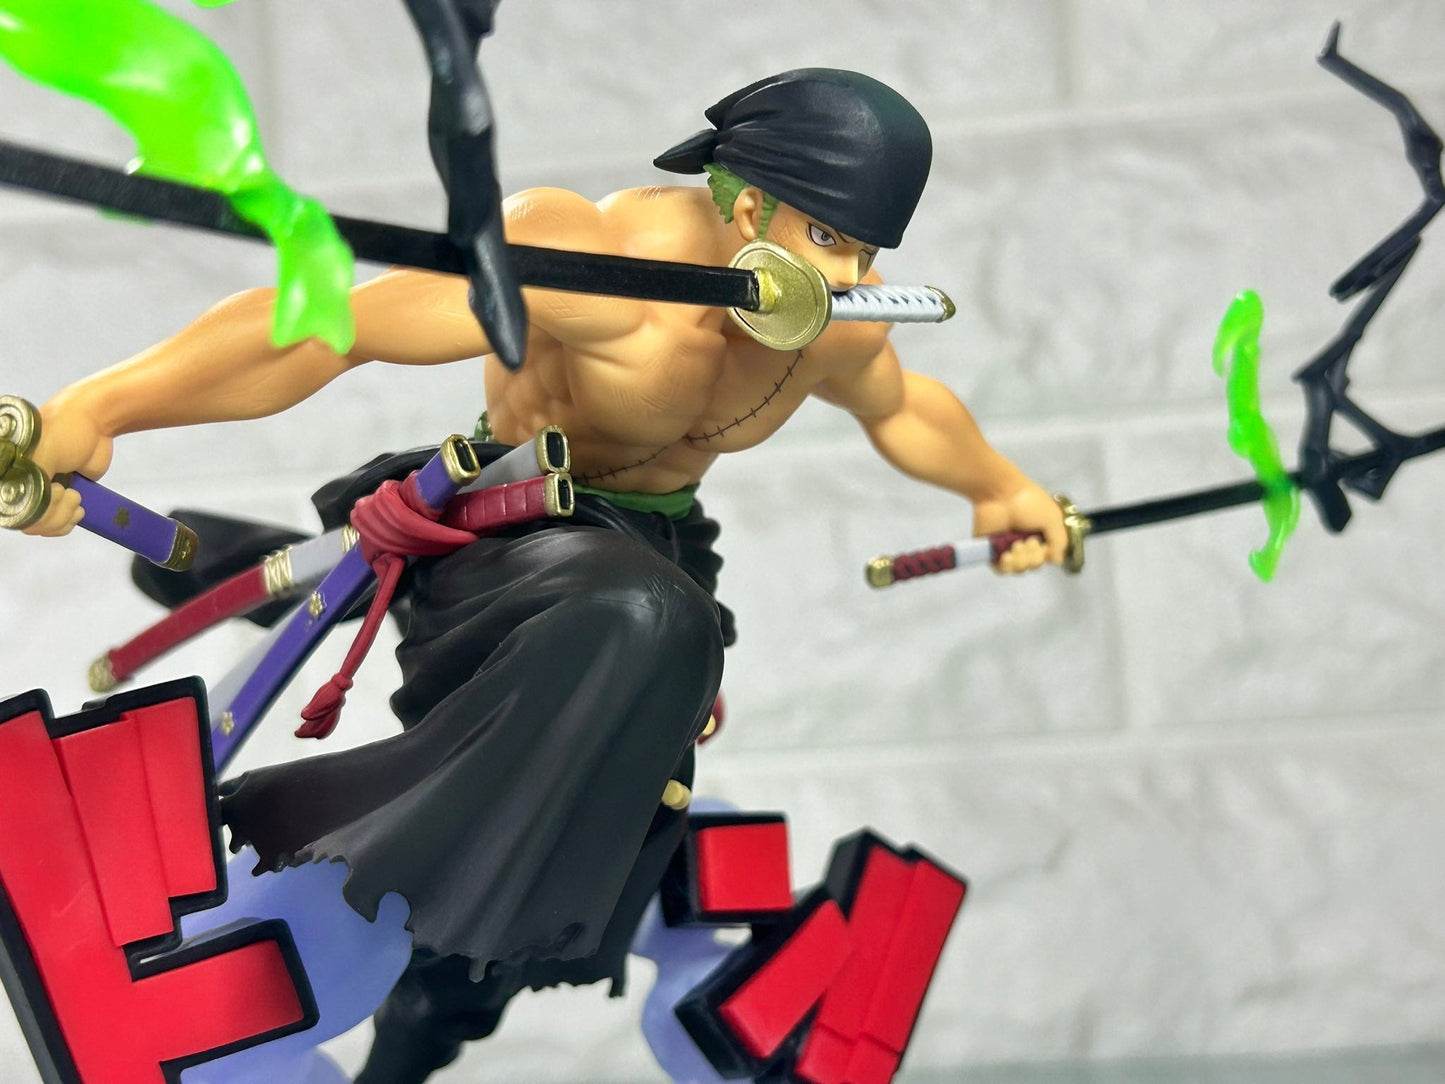 One Piece - Roronoa Zoro - JUMP OUT HEROES